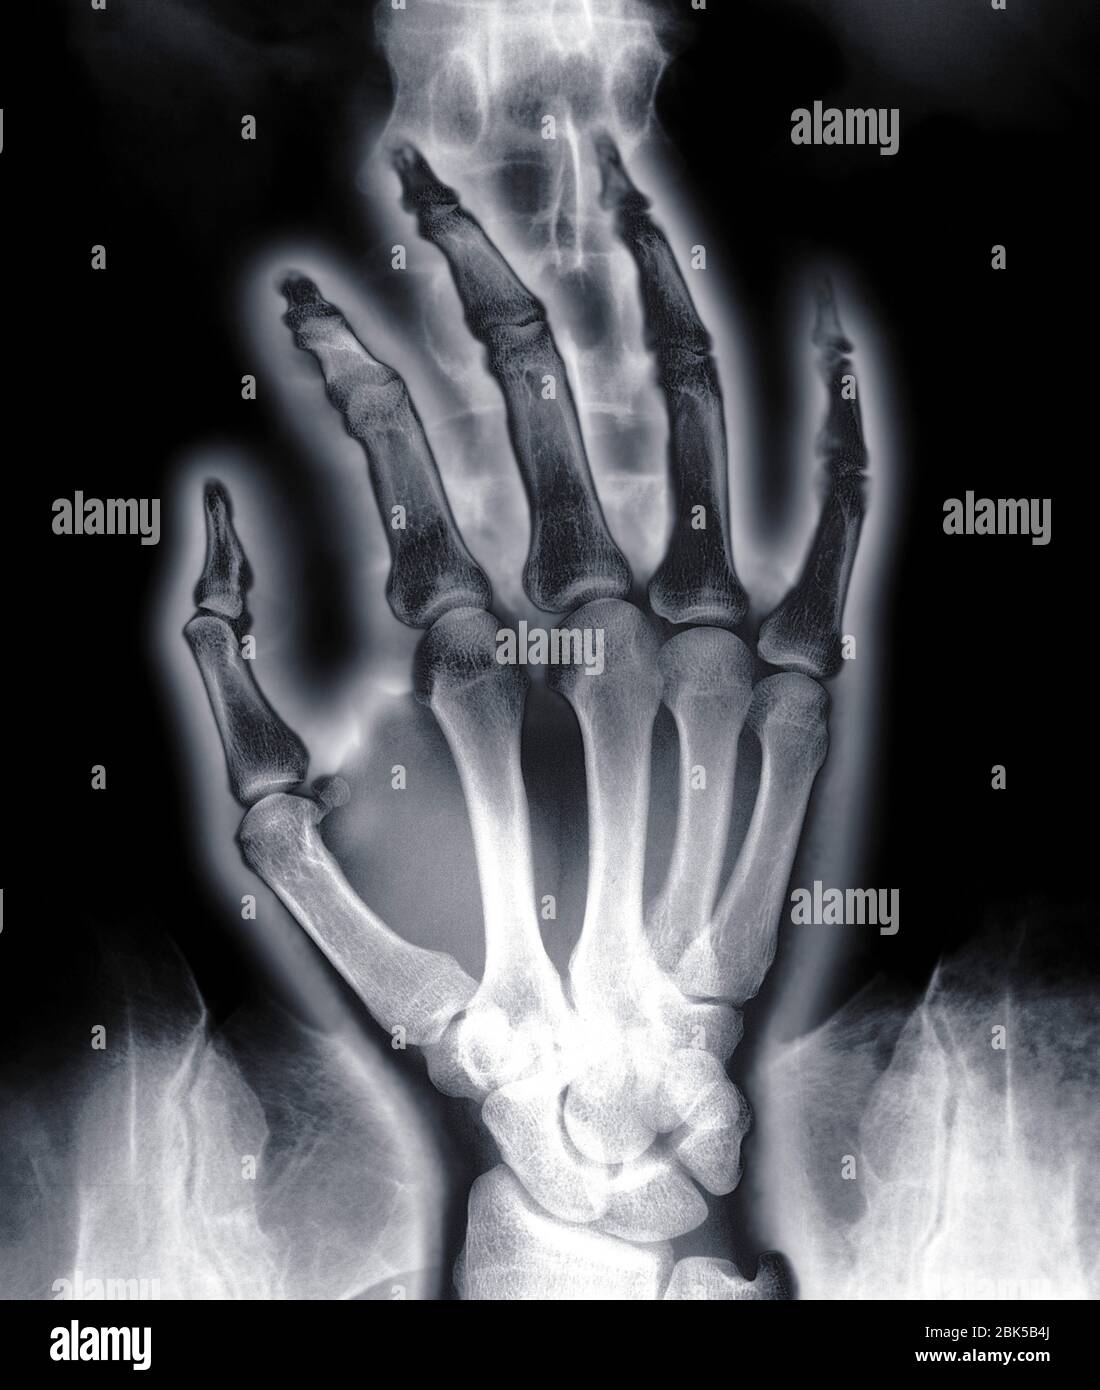 Human hand over spine, X-ray. Stock Photo